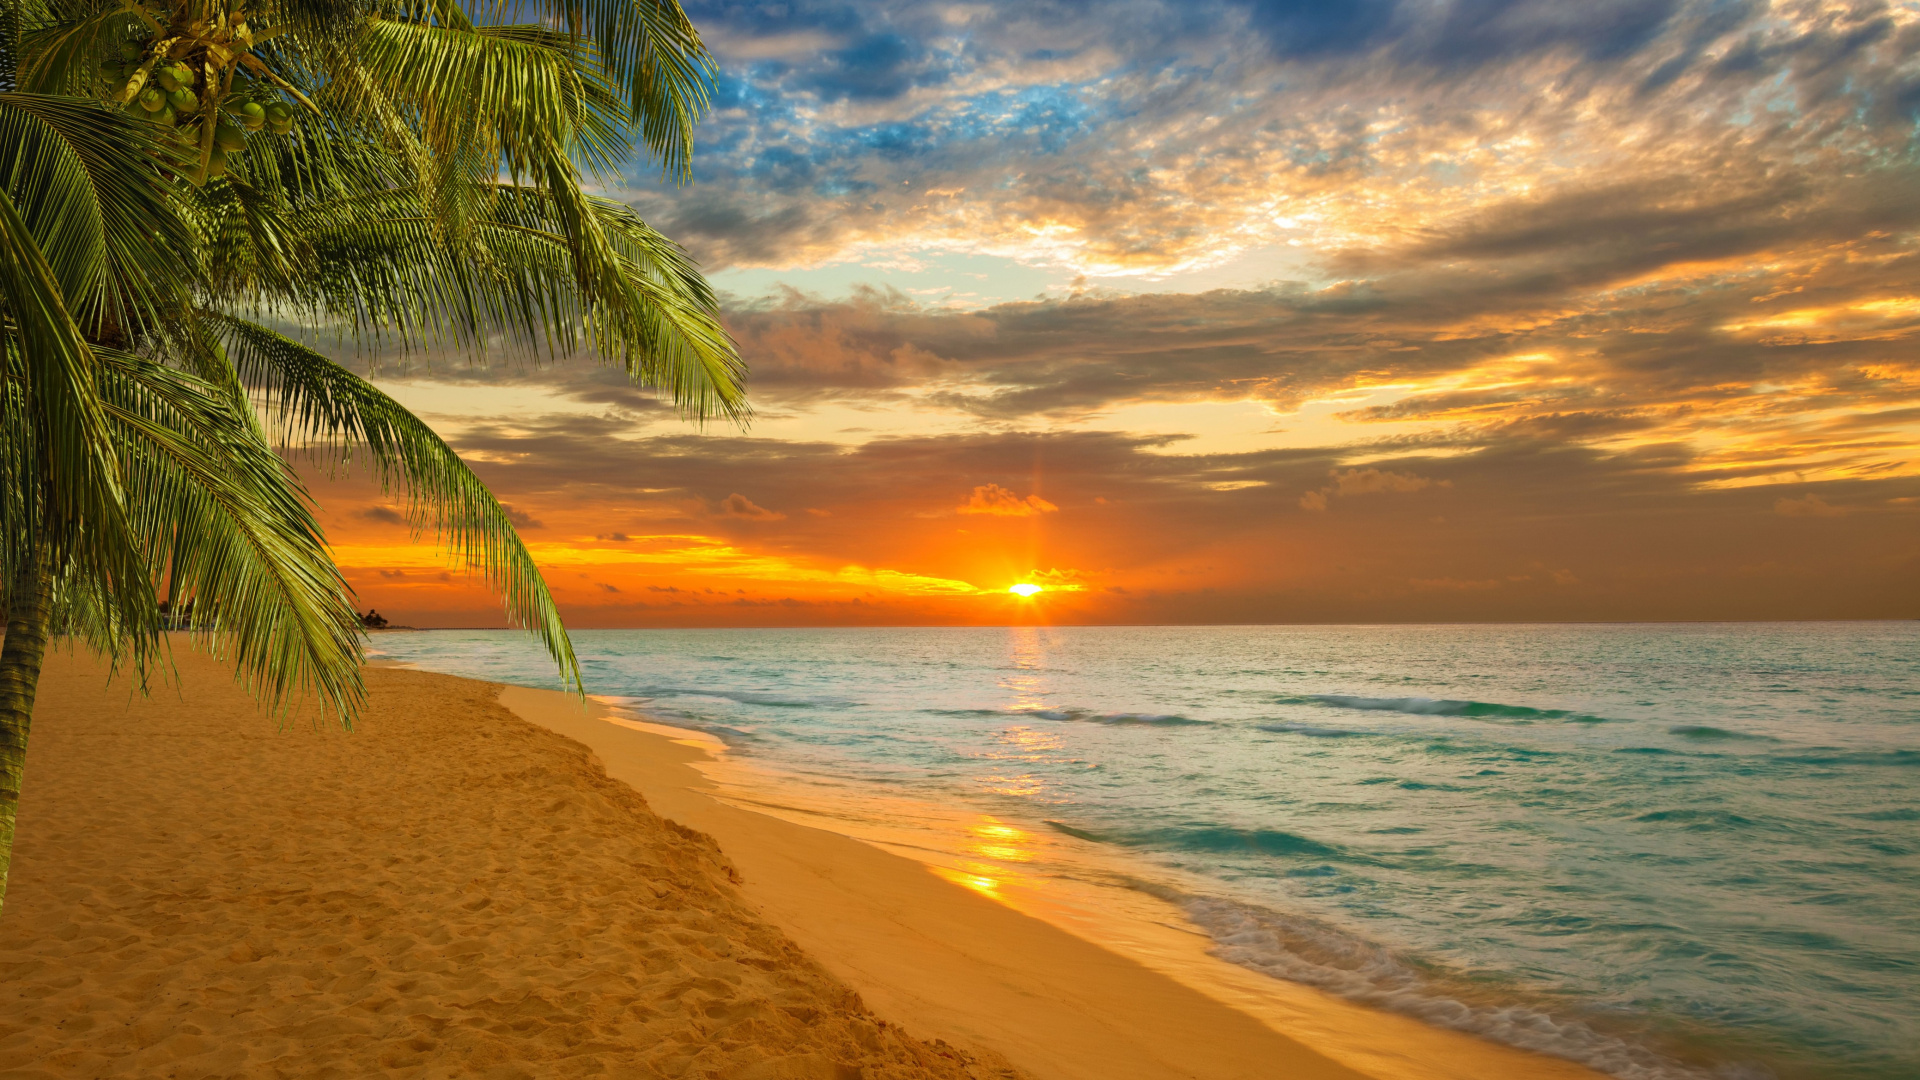 Palm Tree on Beach Shore During Sunset. Wallpaper in 1920x1080 Resolution